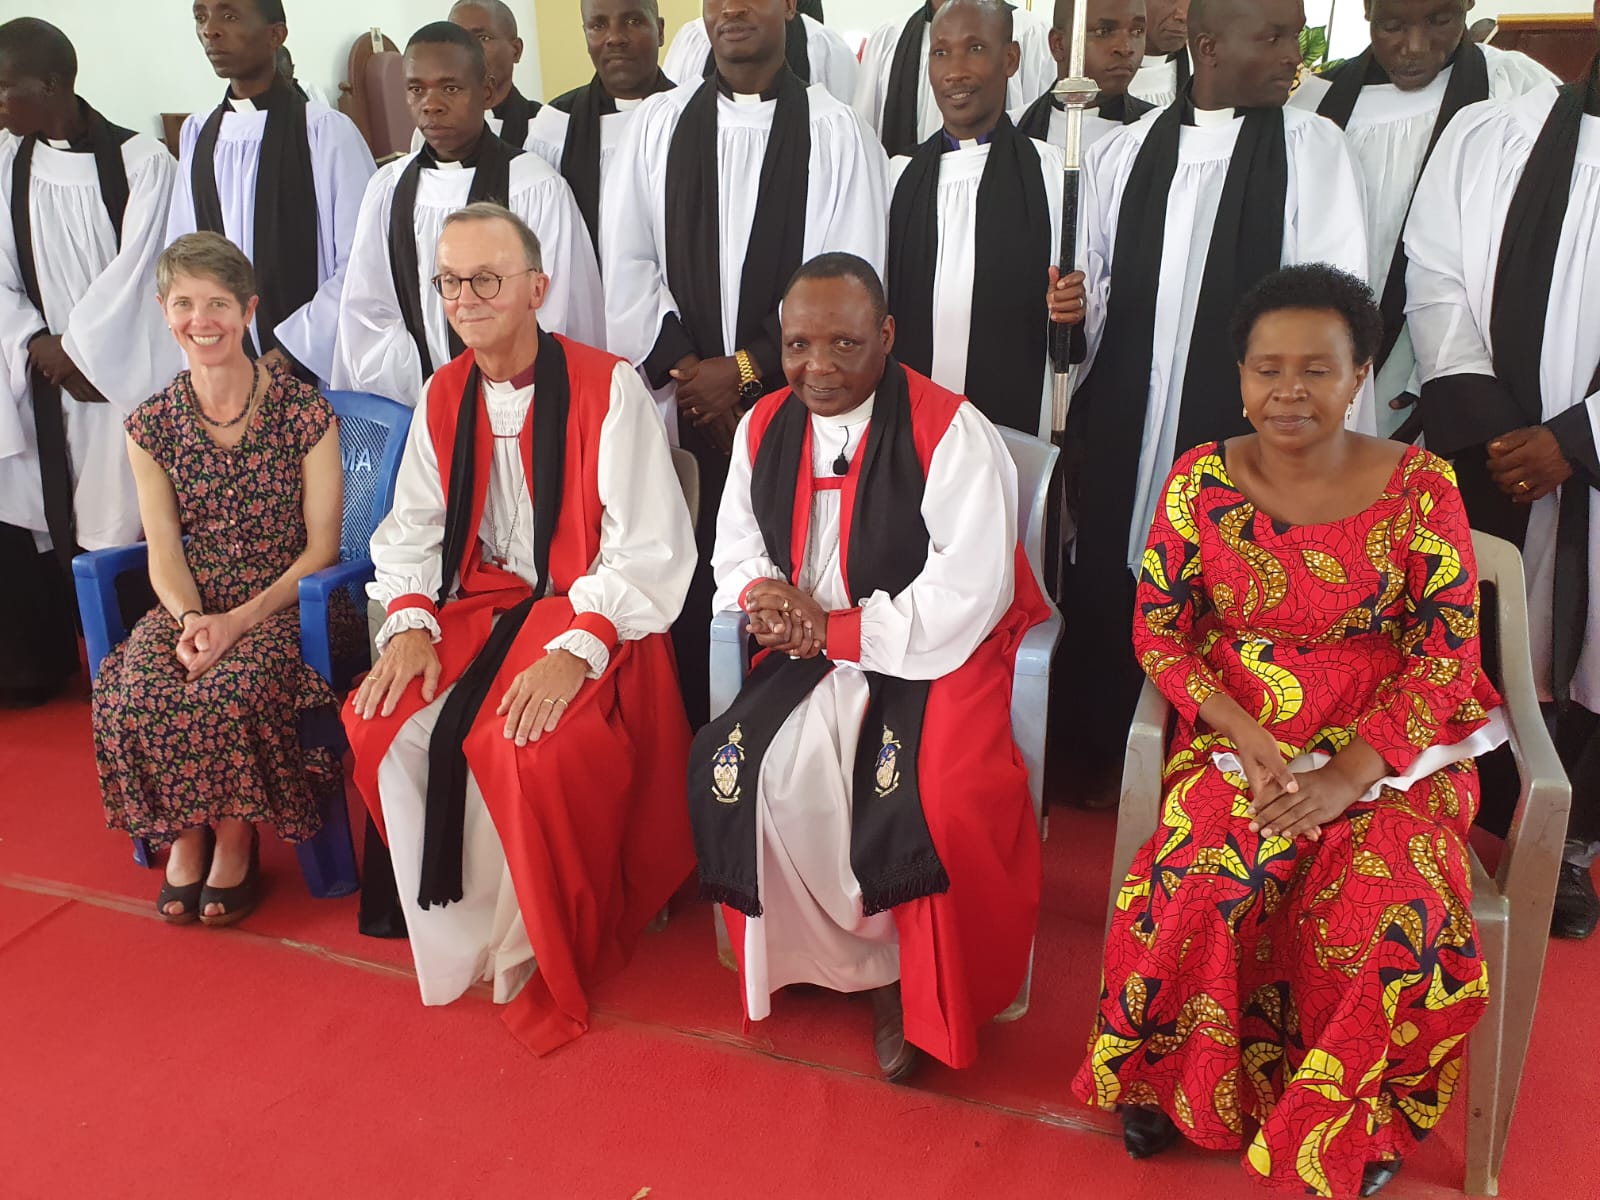 Bishop John & Bishop Godfrey with their wives in front of other clergy